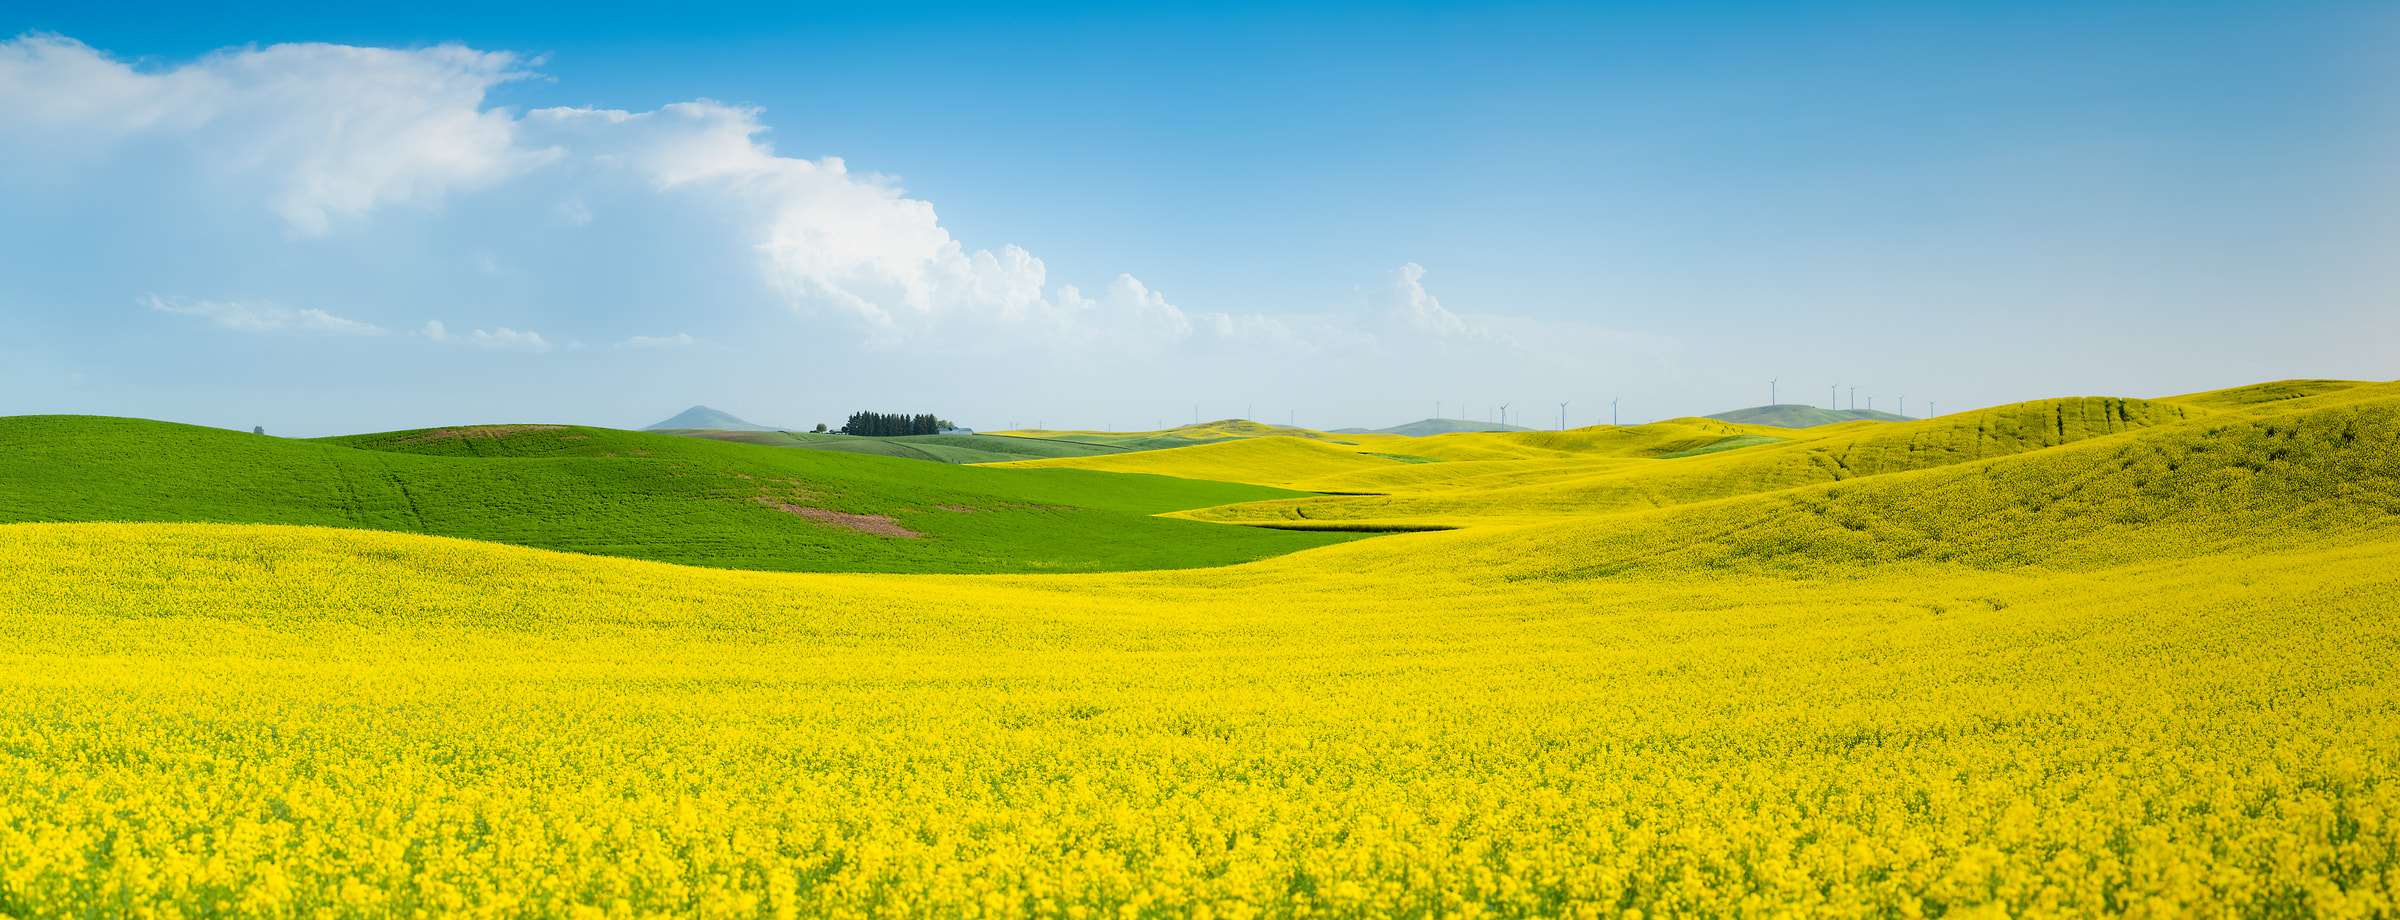 448 megapixels! A very high resolution, large-format VAST photo print of a green and yellow canola field; landscape photograph created by Greg Probst in Palouse, Washington